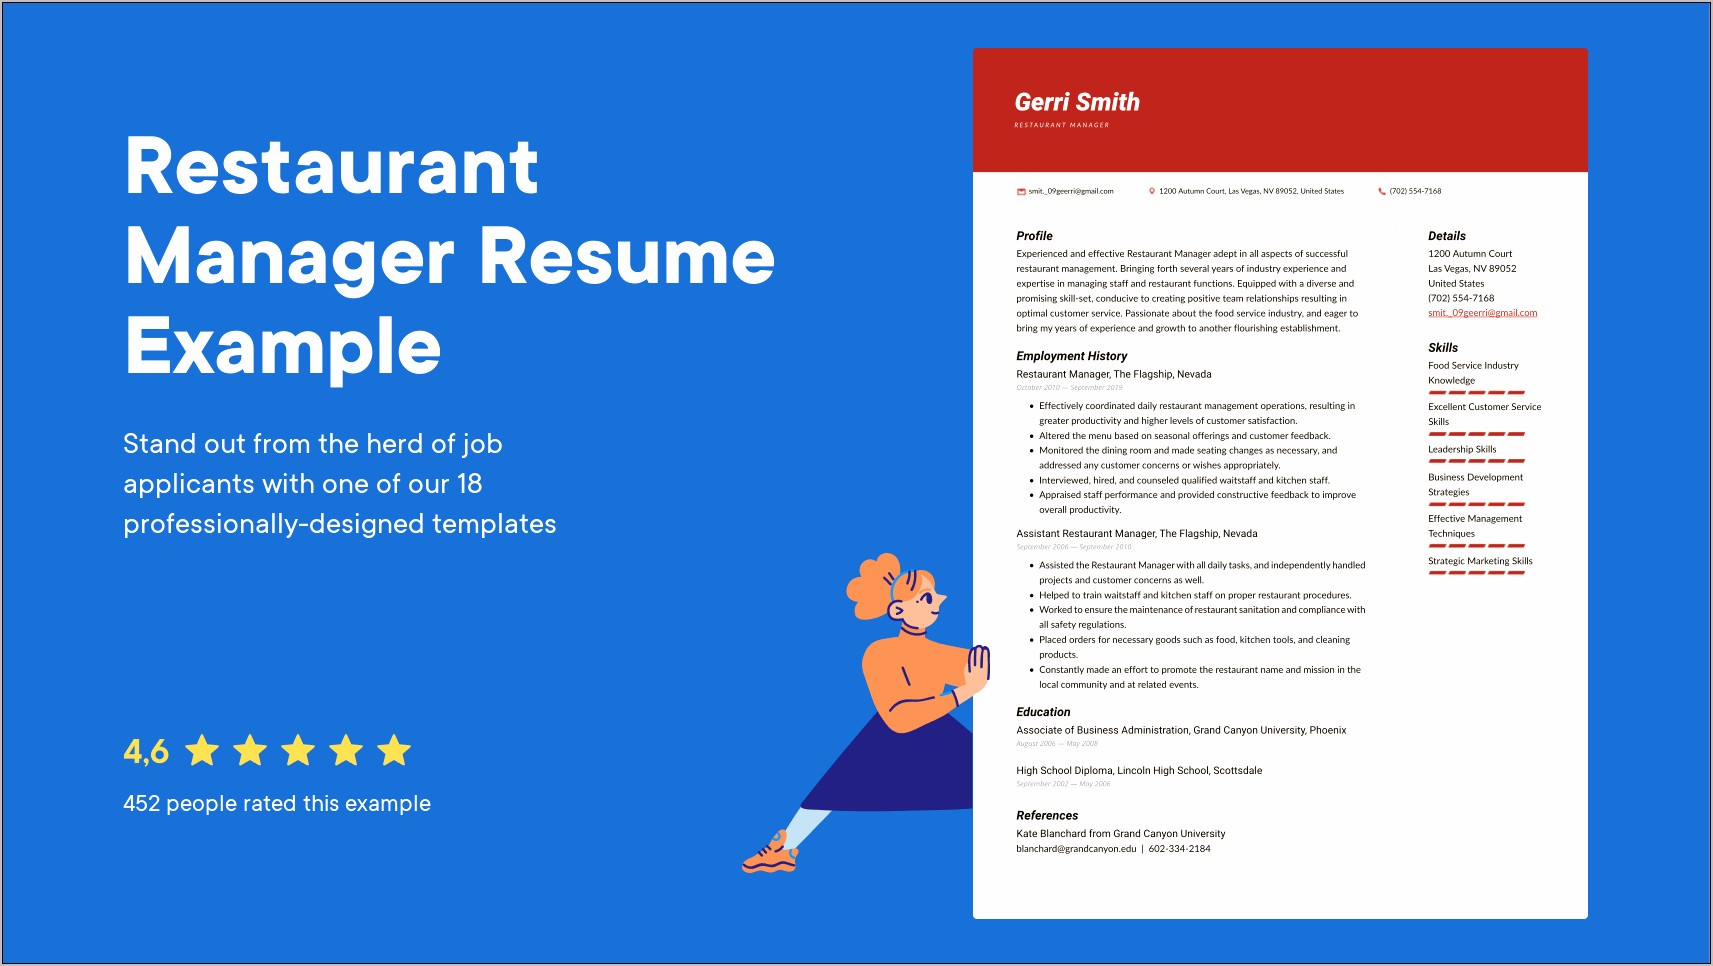 Resume Examples For Manager Of Restaurant